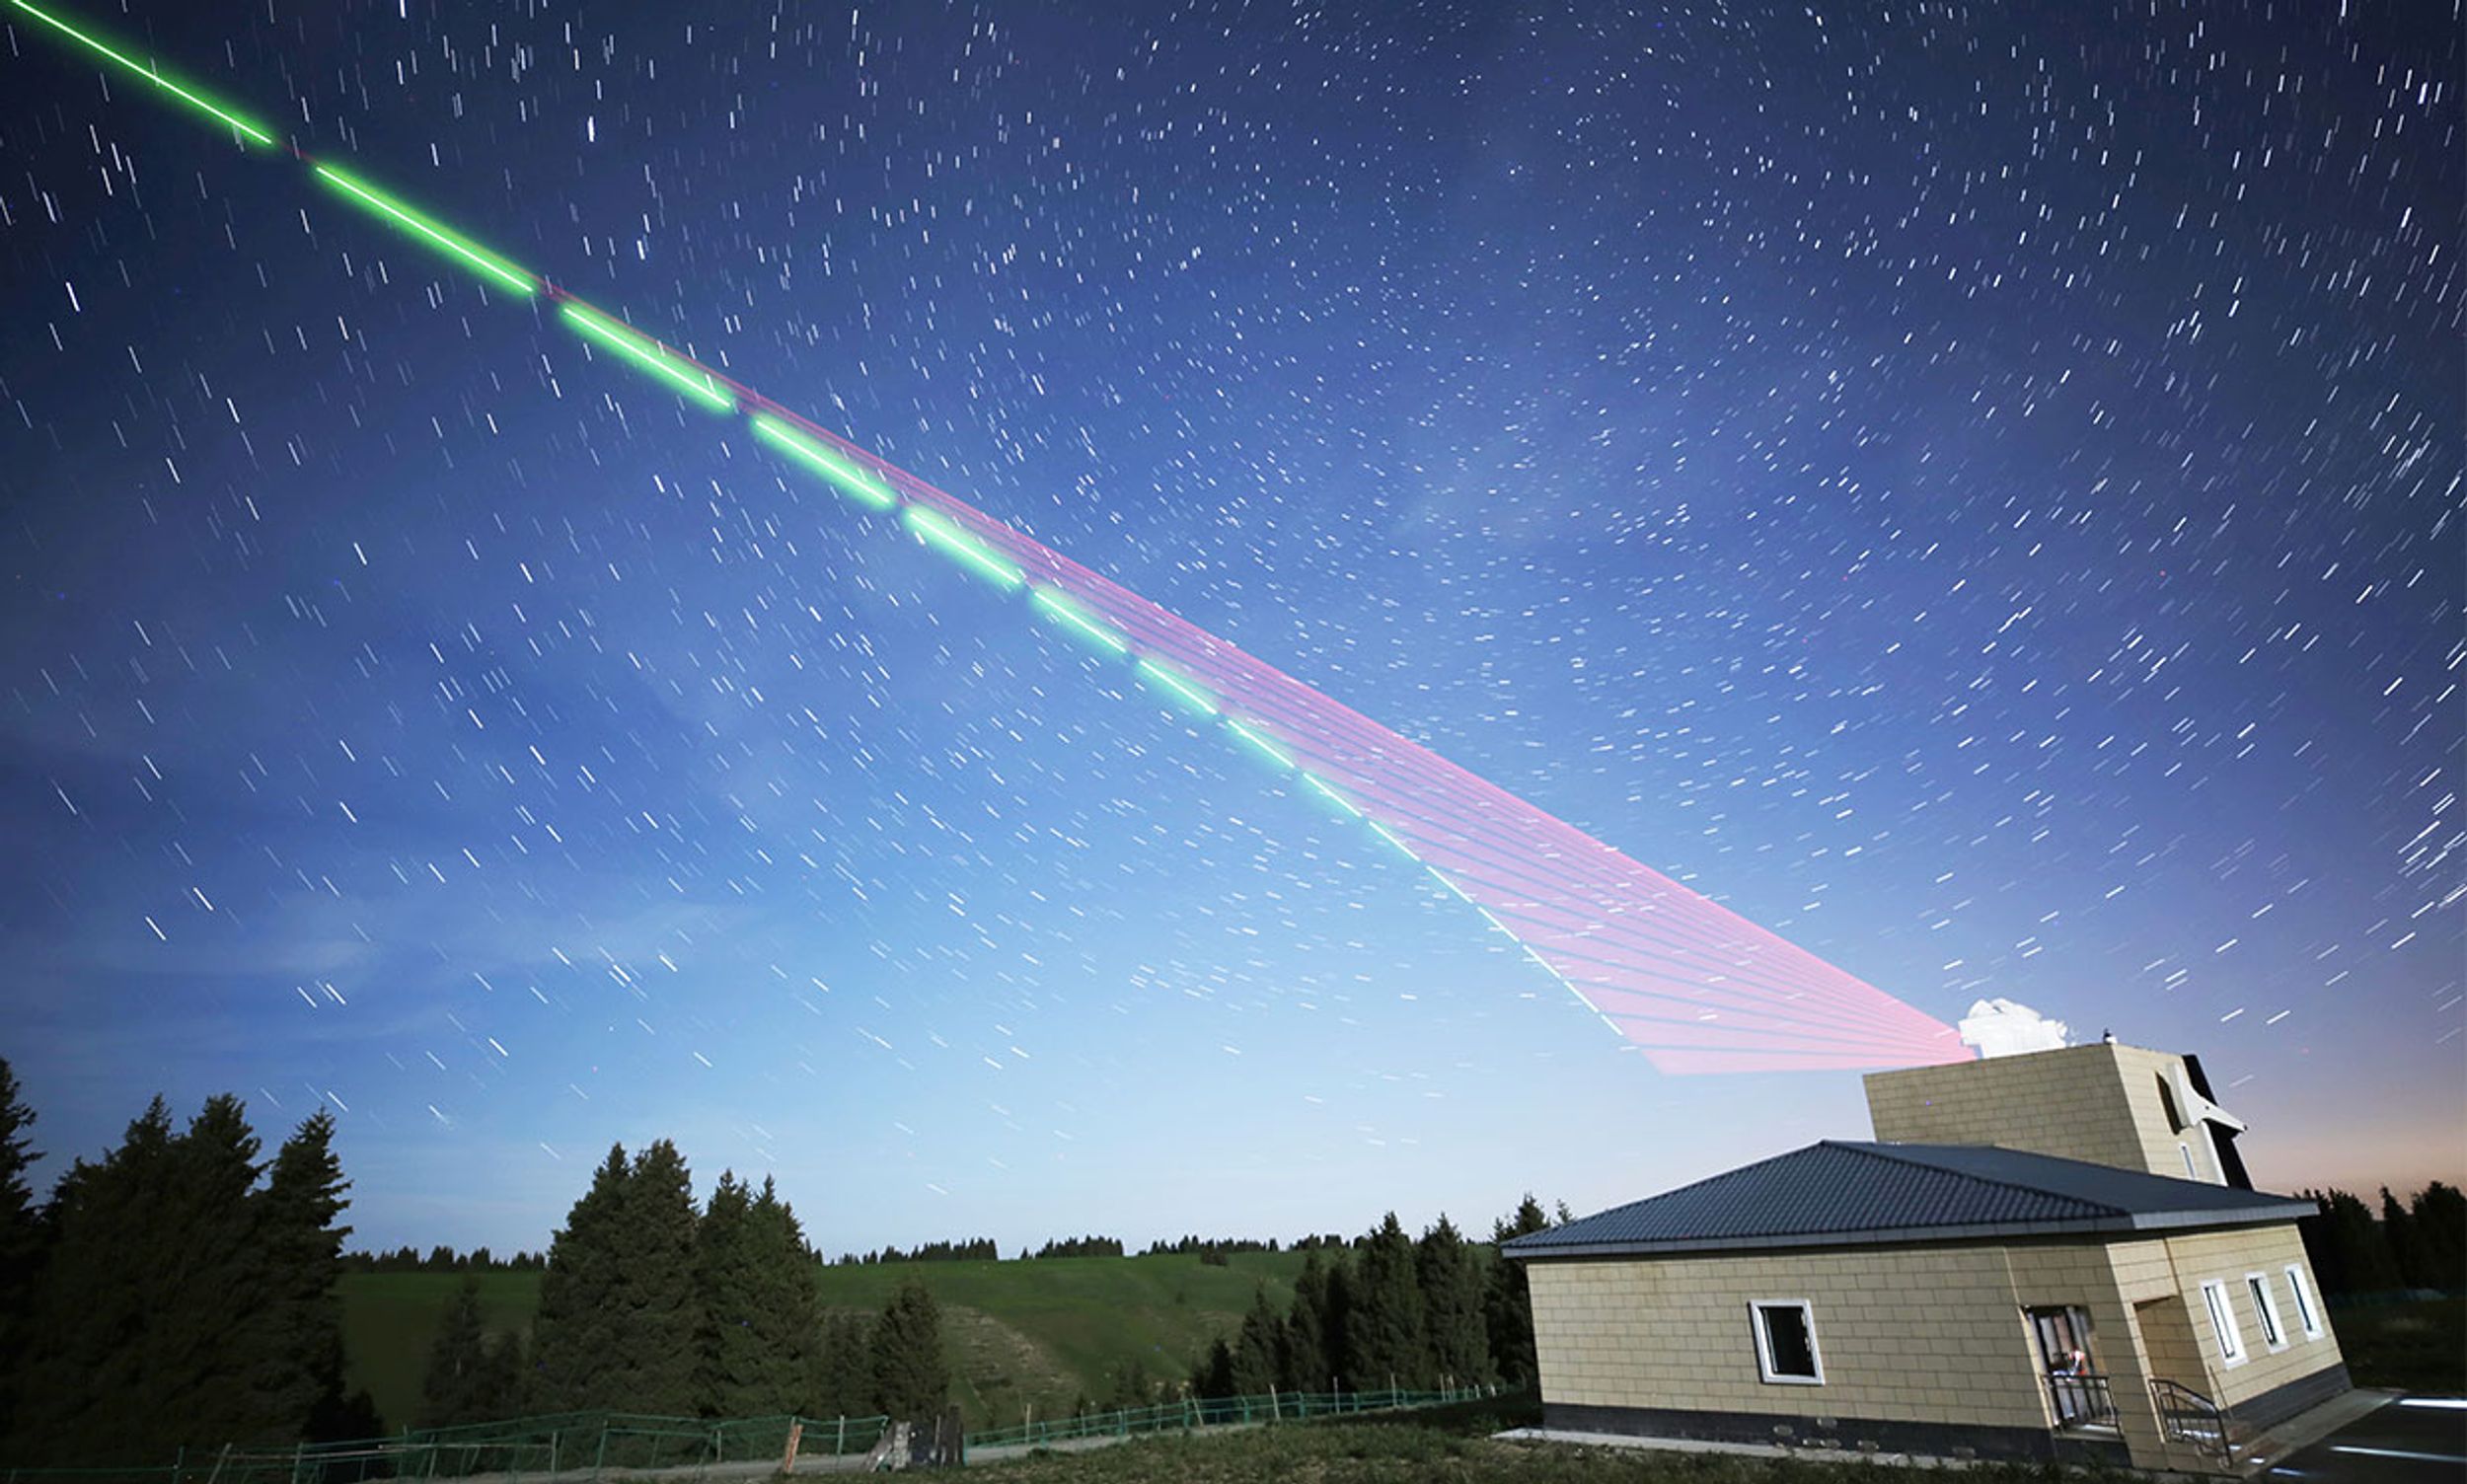 Delayed exposure photograph of the Satellite-to-Earth link in China’s quantum entanglement experiment.